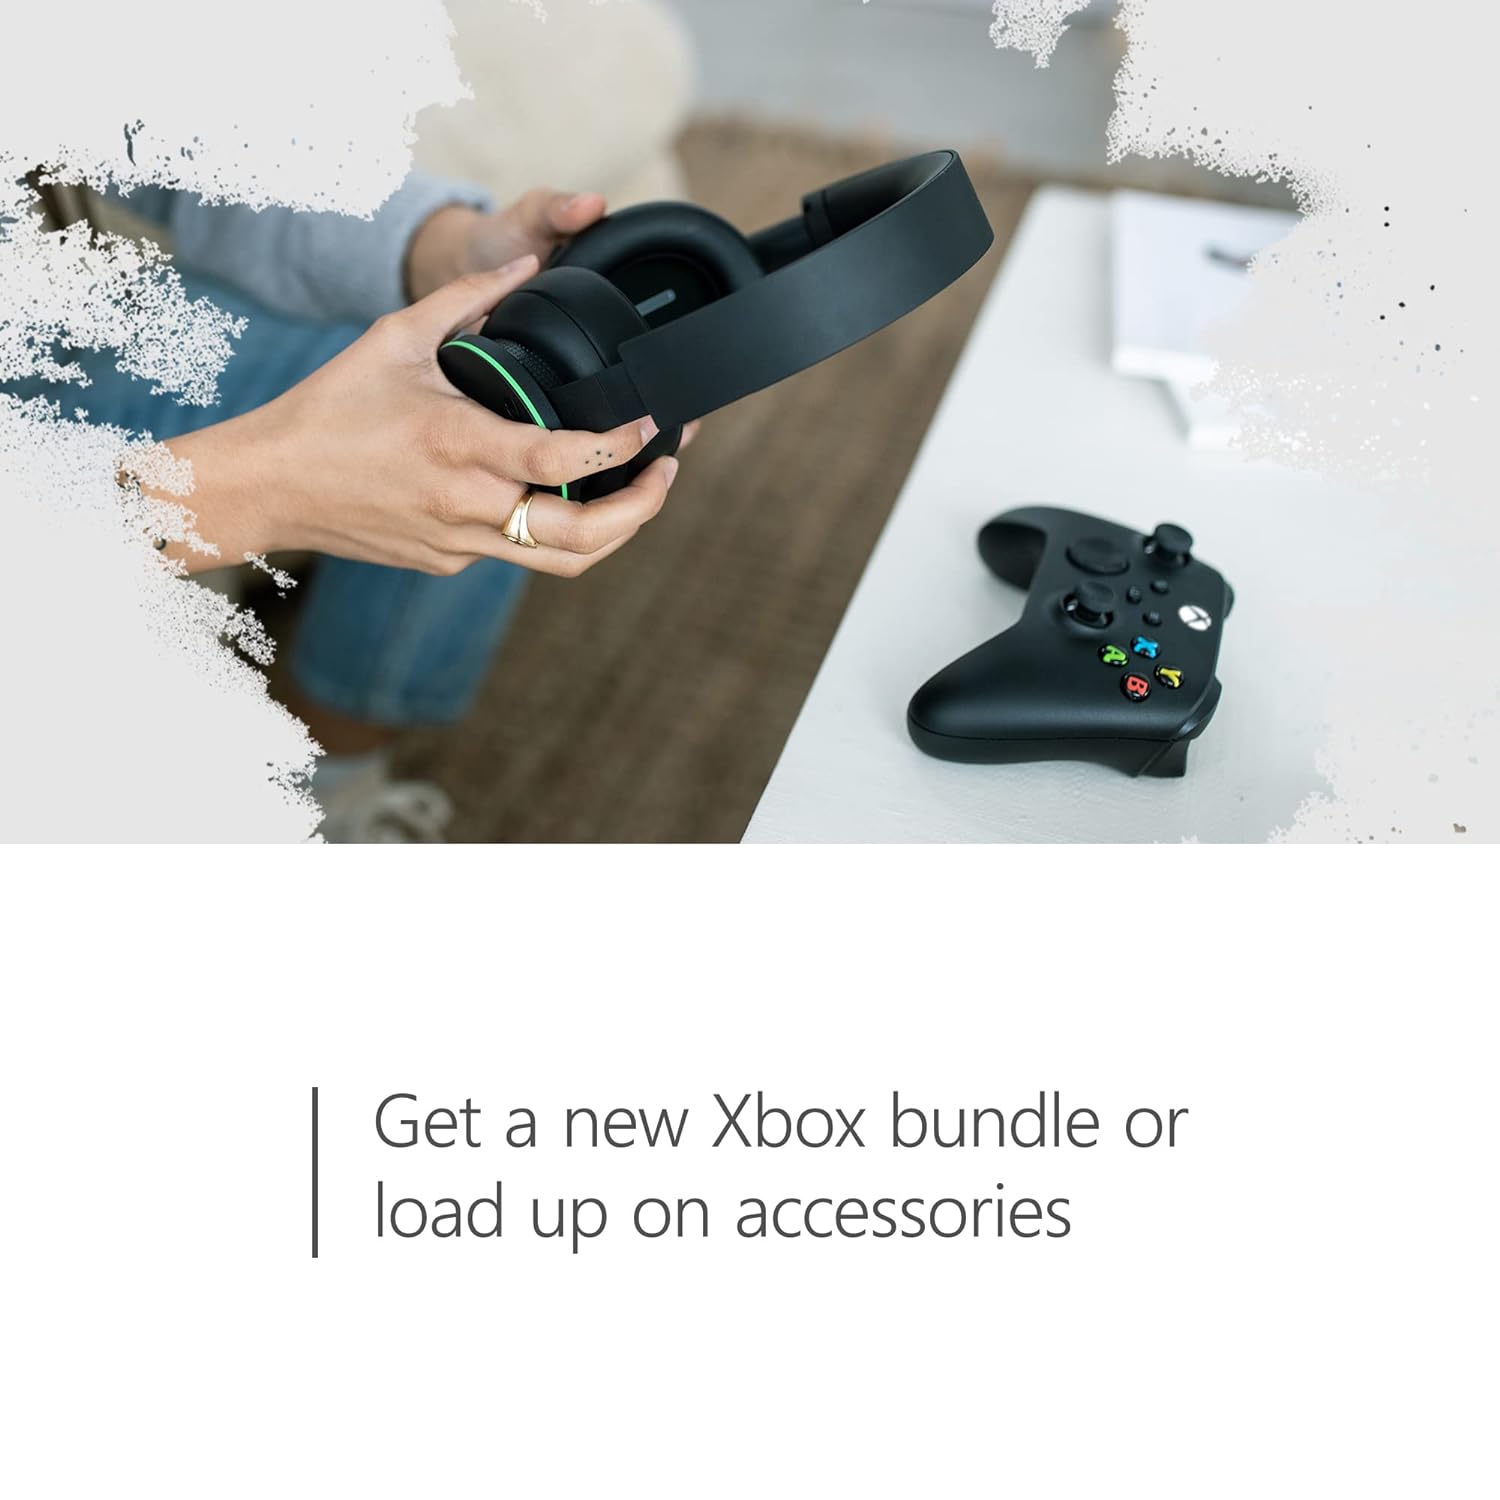 $10 Xbox Digital Gift Card | Get a new Xbox bundle or load up on accessories.